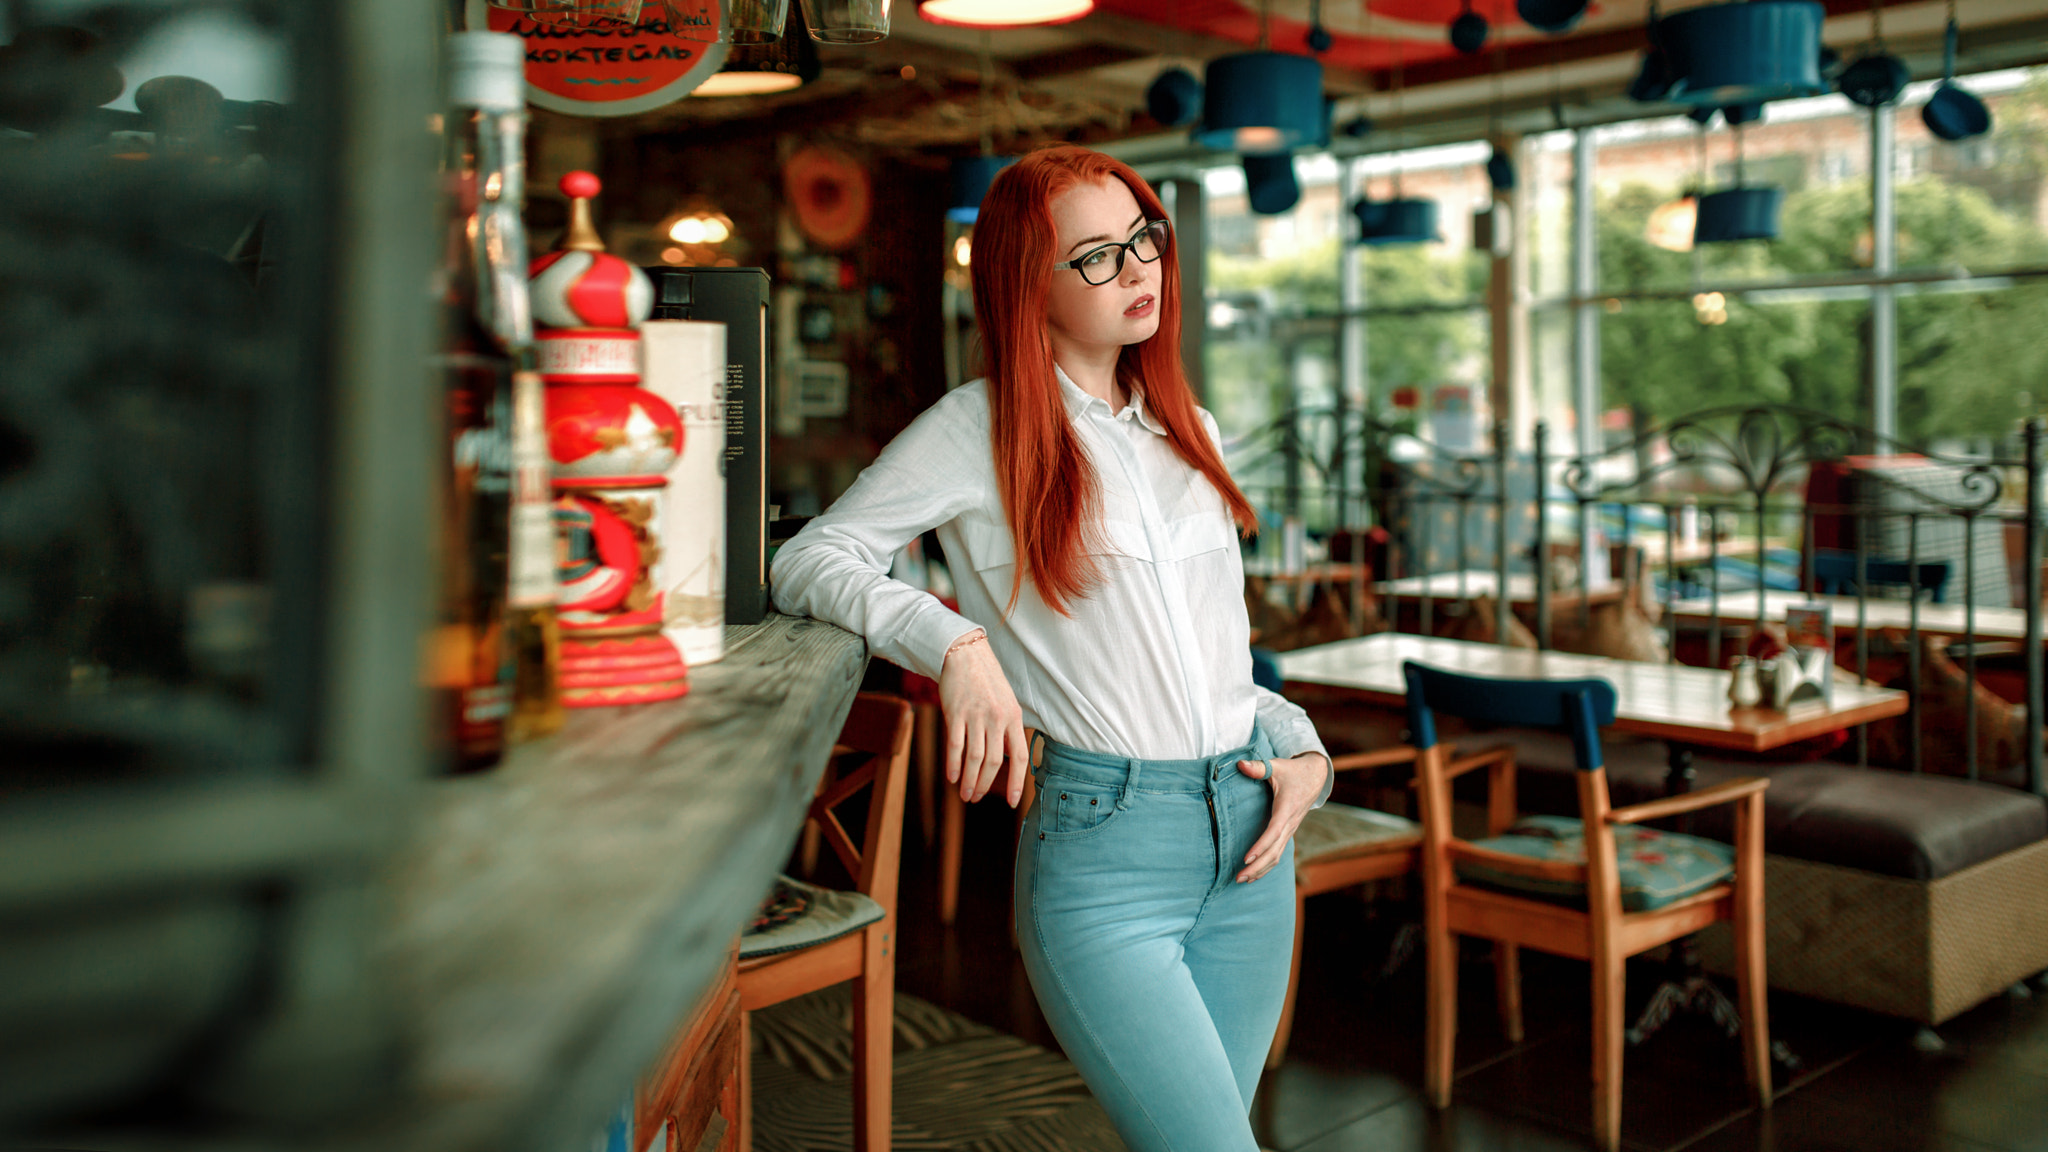 People 2048x1152 women redhead women with glasses jeans shirt looking away portrait